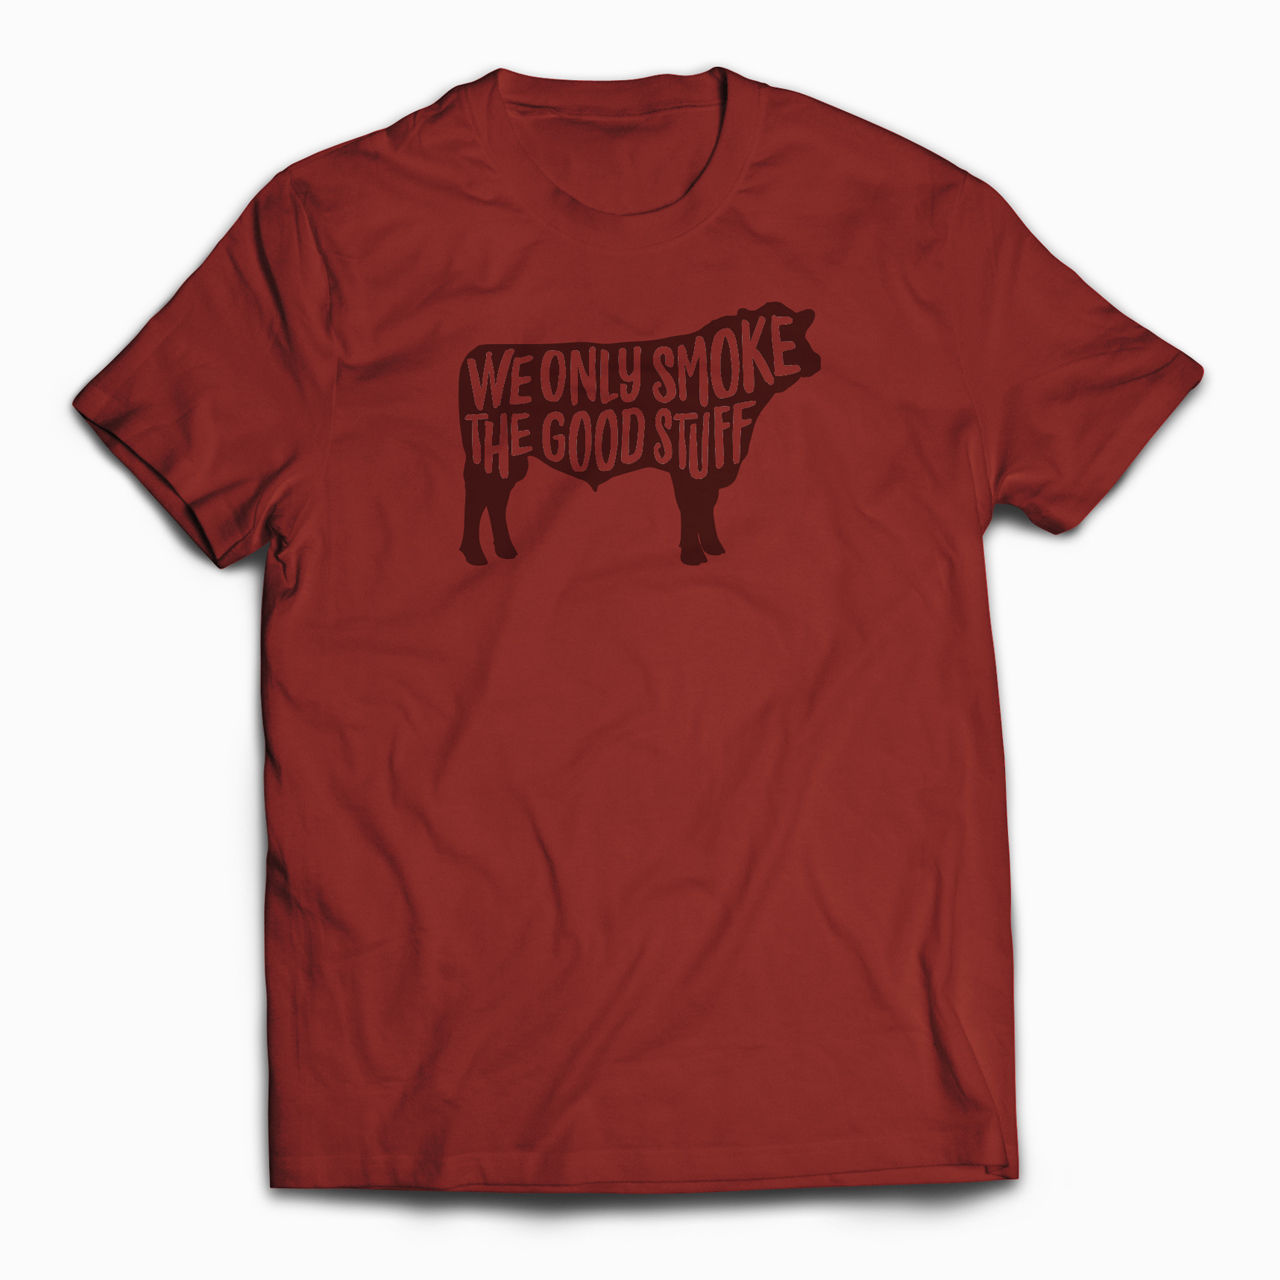 An image of a T-shirt design that says "We Only Smoke the Good Stuff" in the silhouette of a cow